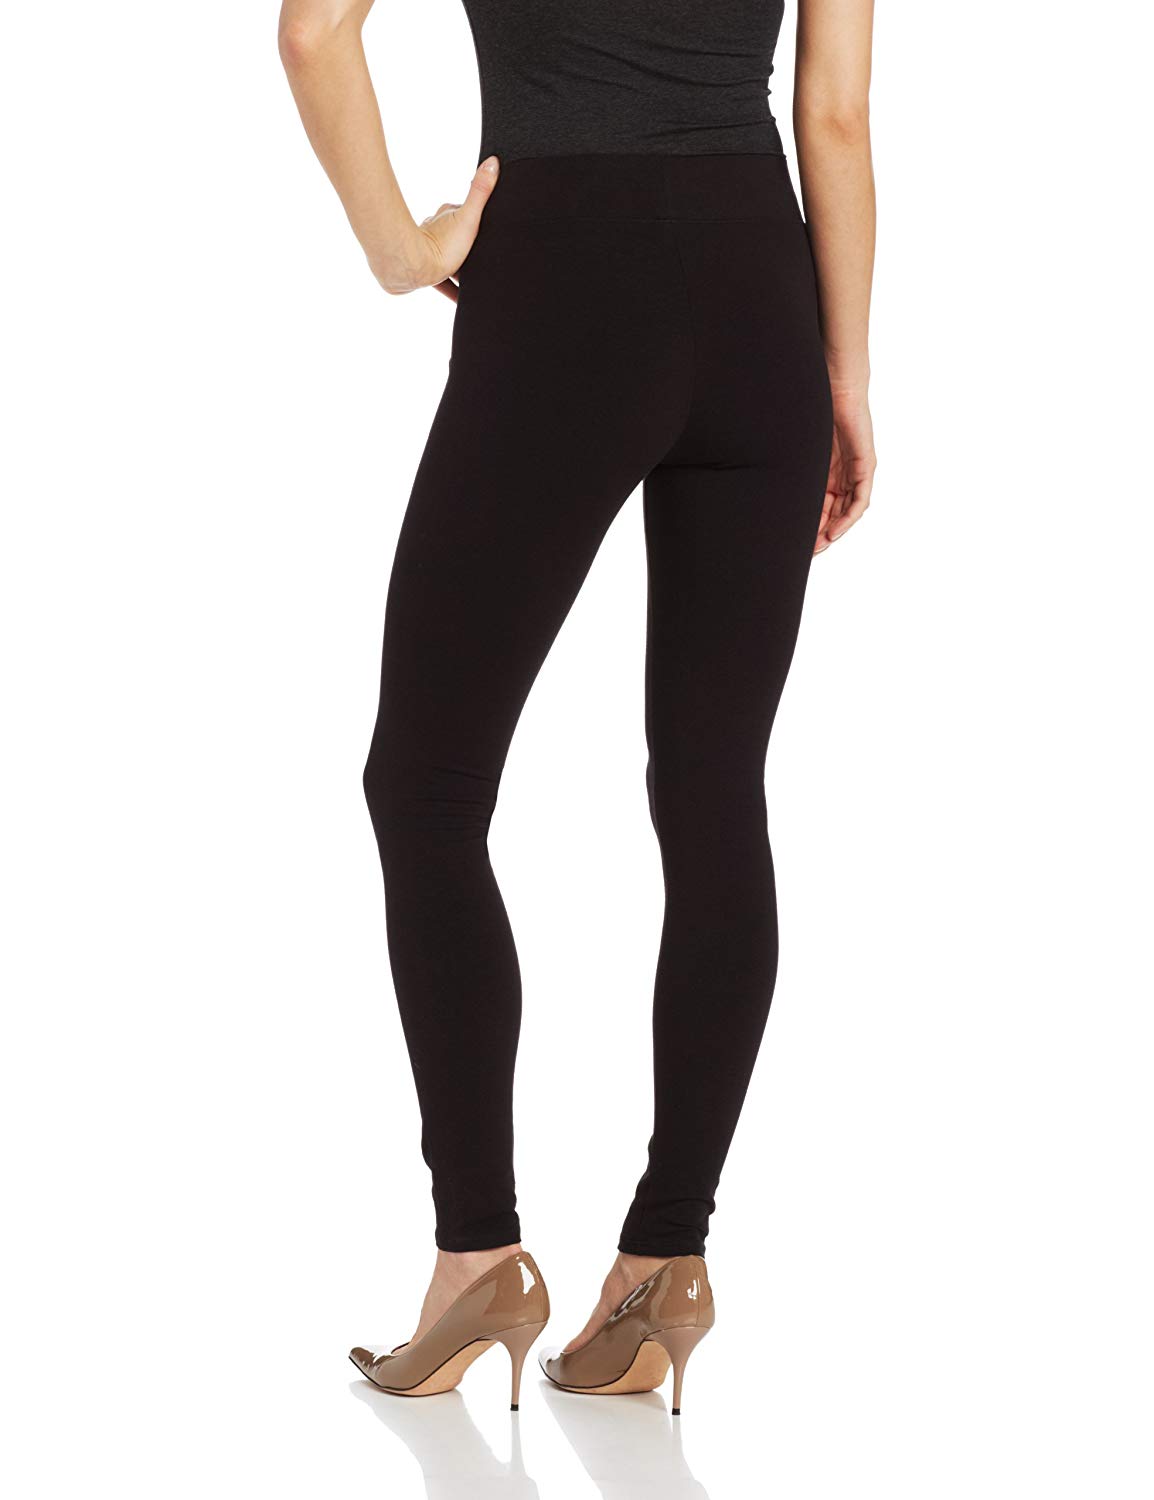 Hue Women's Ultra Legging with Wide Waistband - Small - Black, Black ...